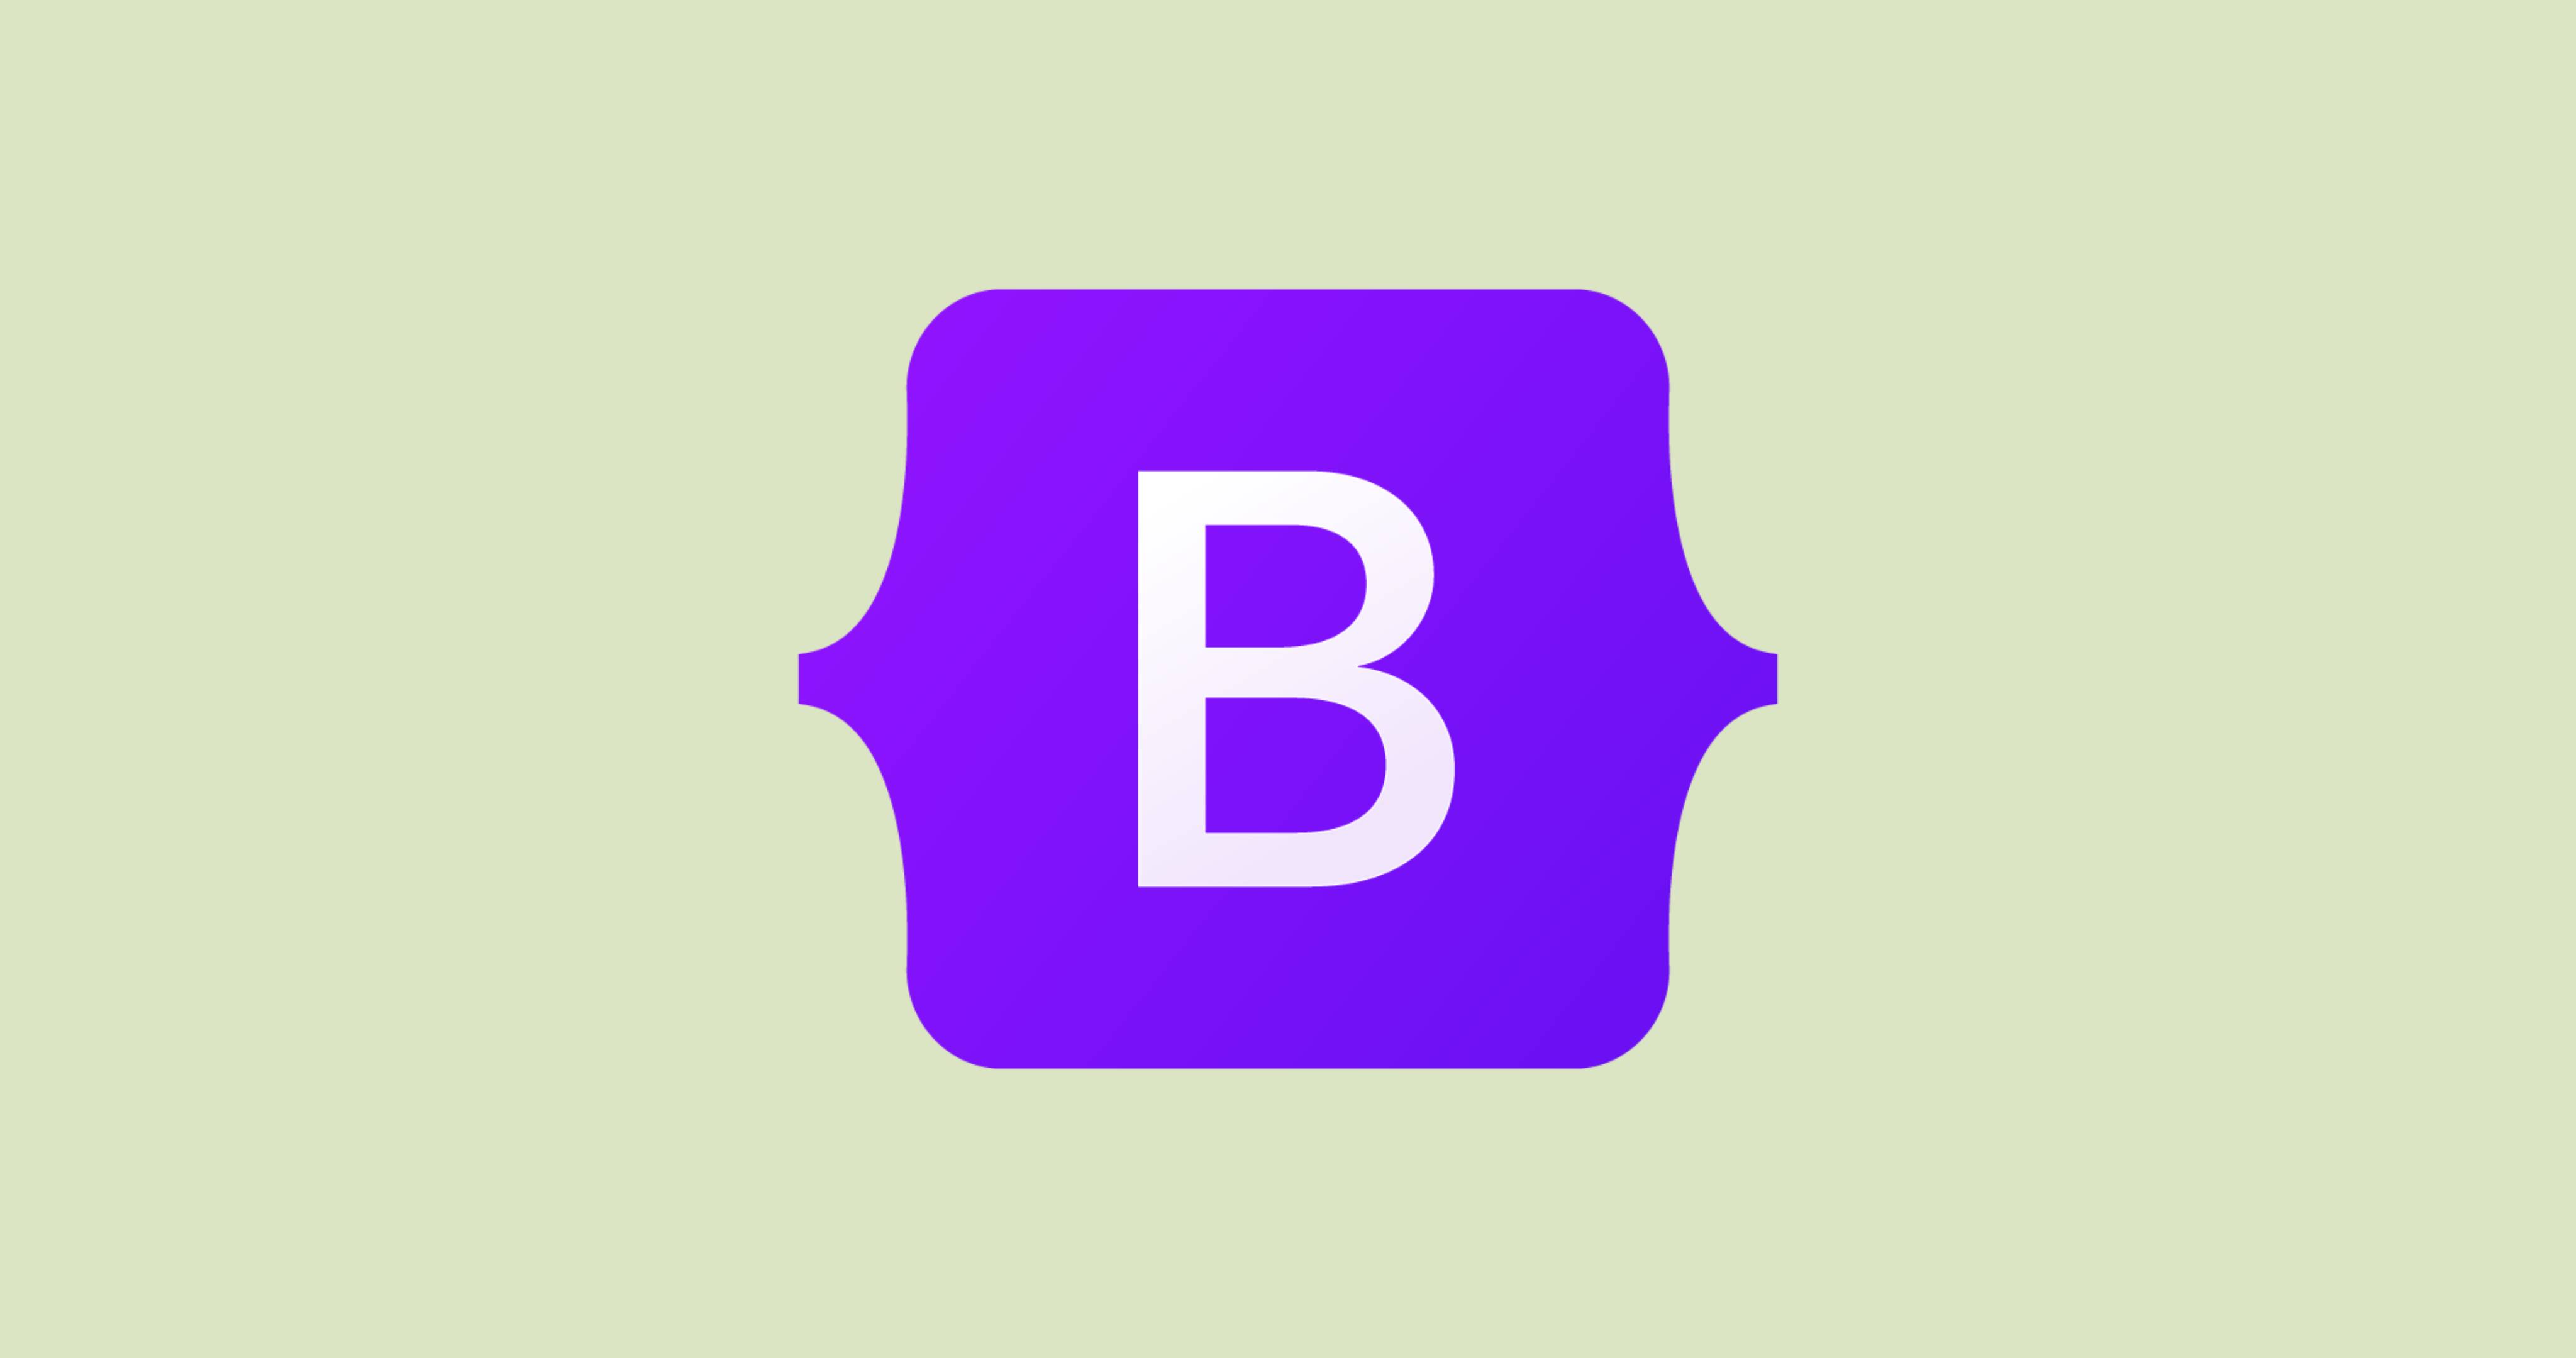 bootstrap-text-bold-example-aguidehub